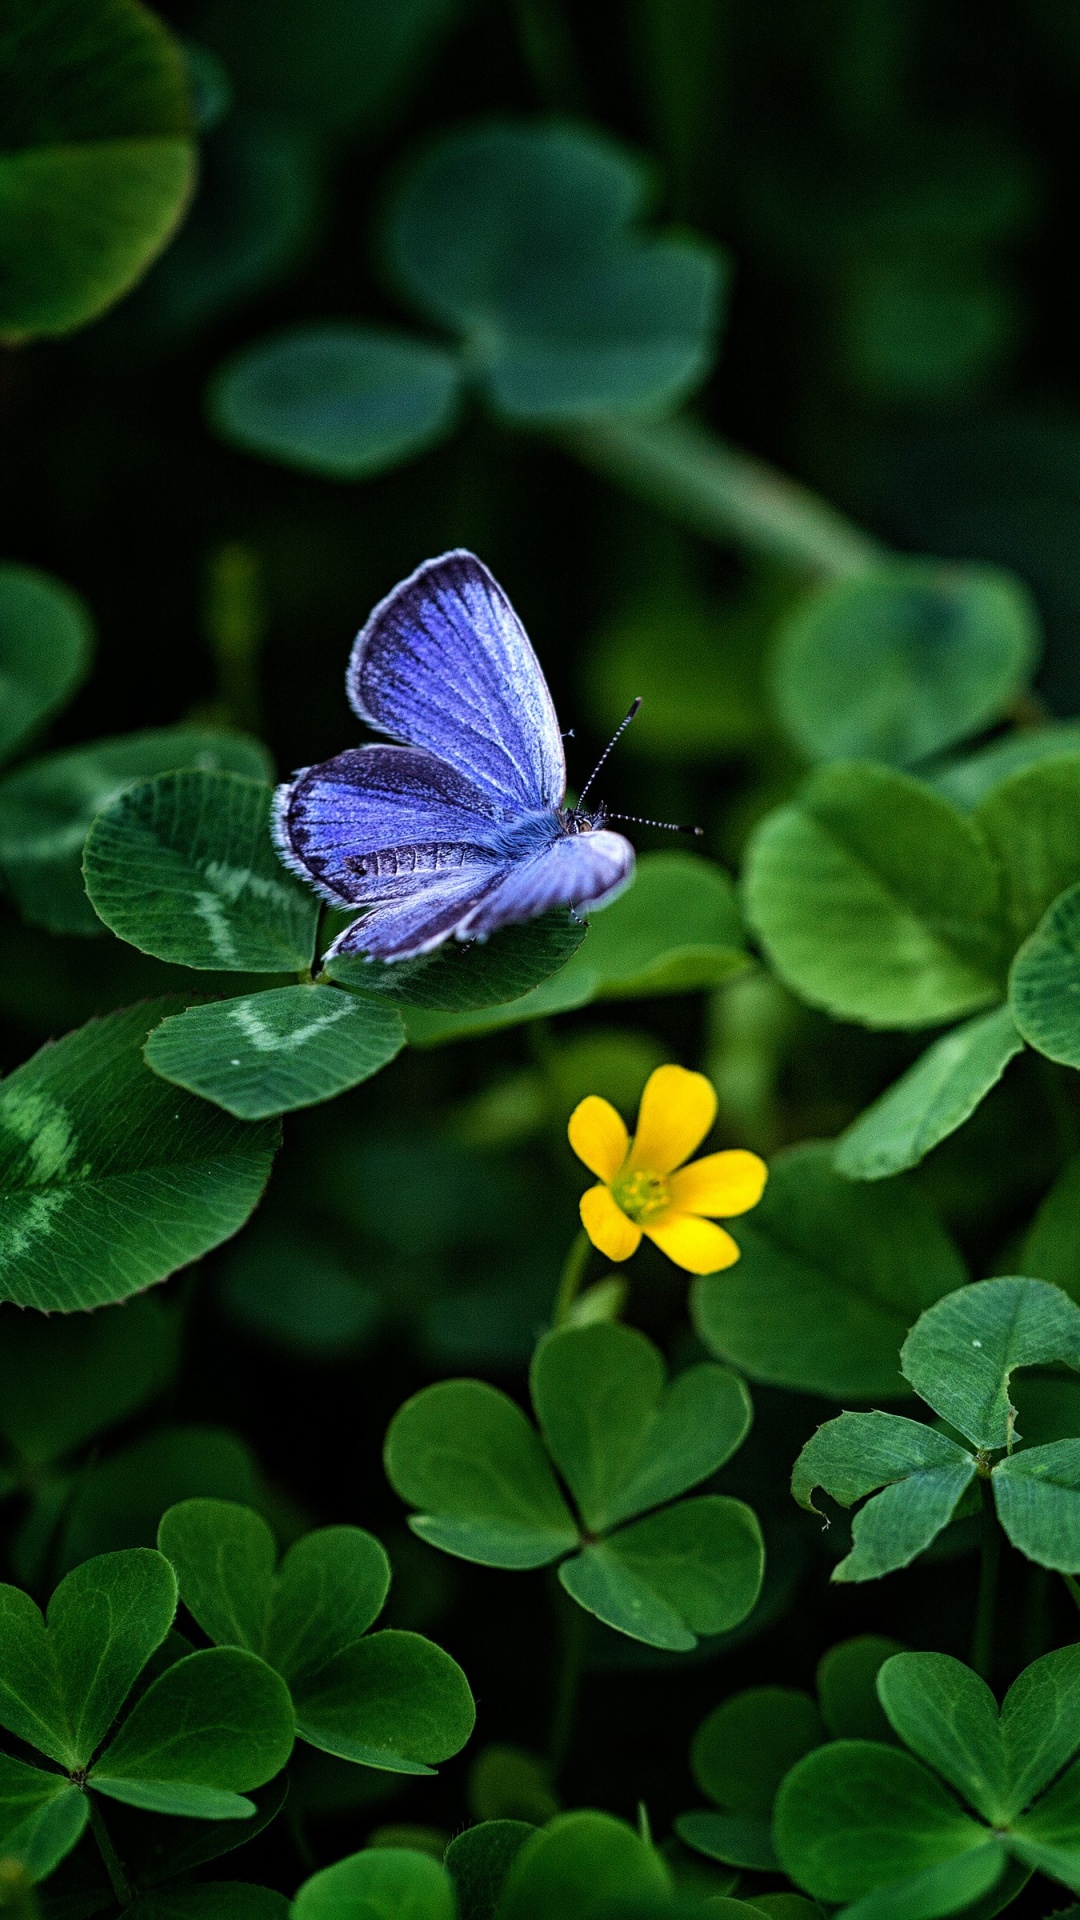 Blue Butterfly Perched on Yellow Flower in Close up Photography During Daytime. Wallpaper in 1080x1920 Resolution